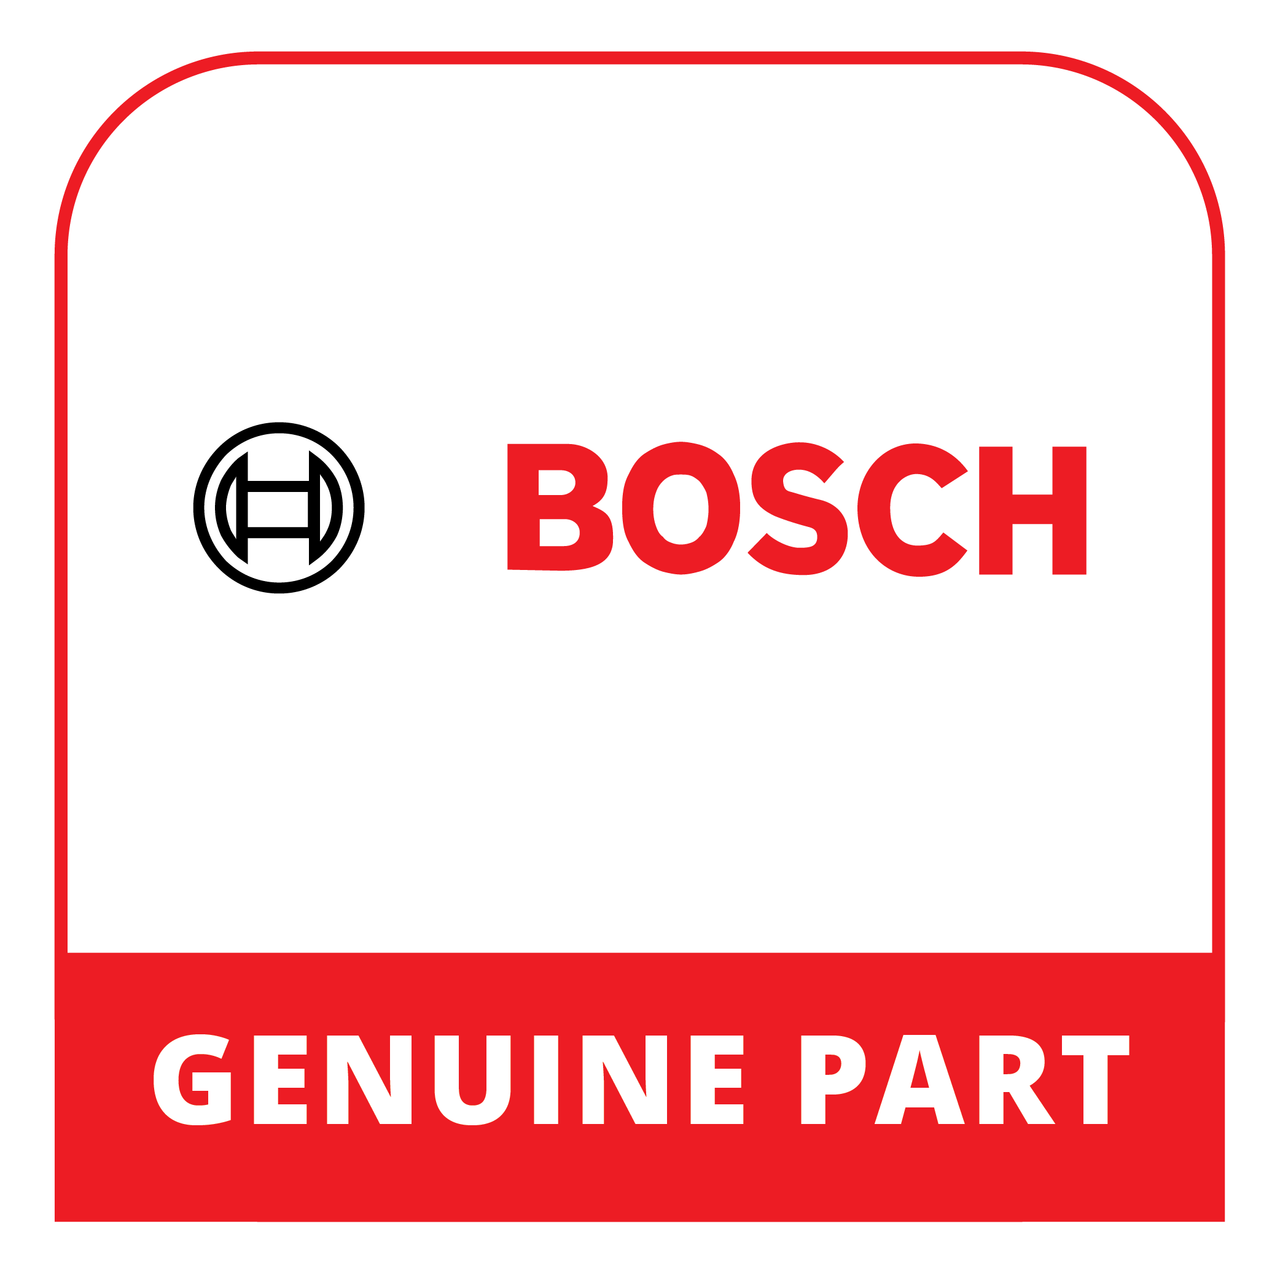 Bosch (Thermador) 18077439 - Instruction Manual - Genuine Bosch (Thermador) Part